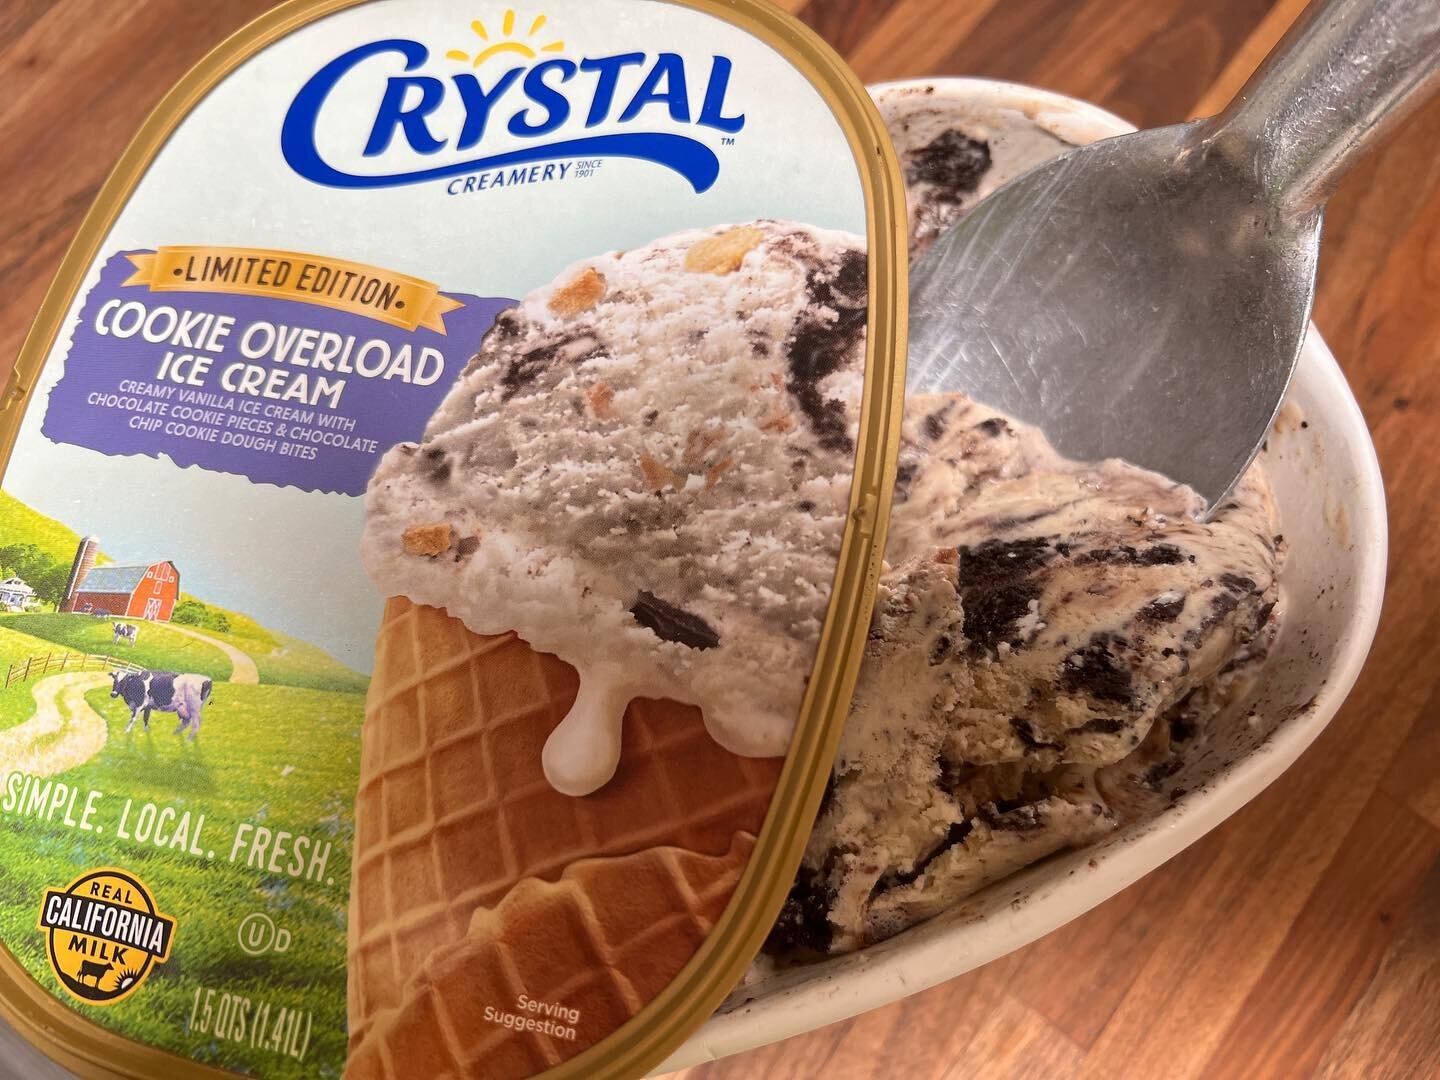 Happy ice cream sundae day! Beat the heat by starting with a scoop of @crystalcreamery Cookie Overload Ice Cream! Cookies&hellip; cookie dough&hellip; Crystal Creamery ice cream? Yes please! You&rsquo;ll find this flavor for a limited time so get it 